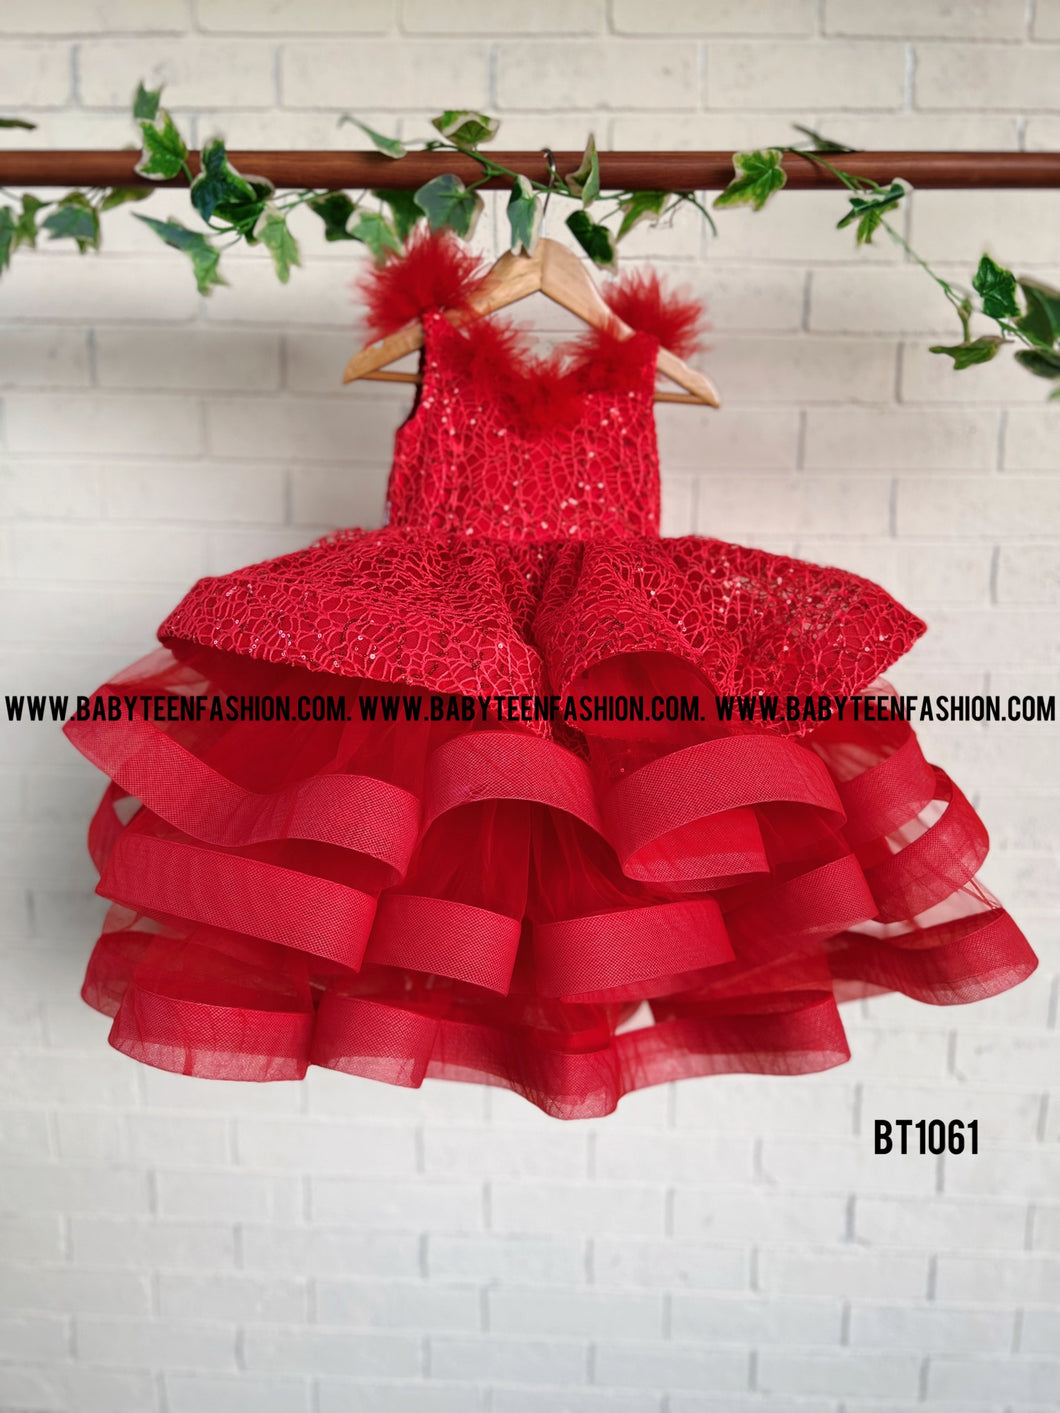 BT1061 Scarlet Sizzle Party Dress - A Fiery Flair for the Festive